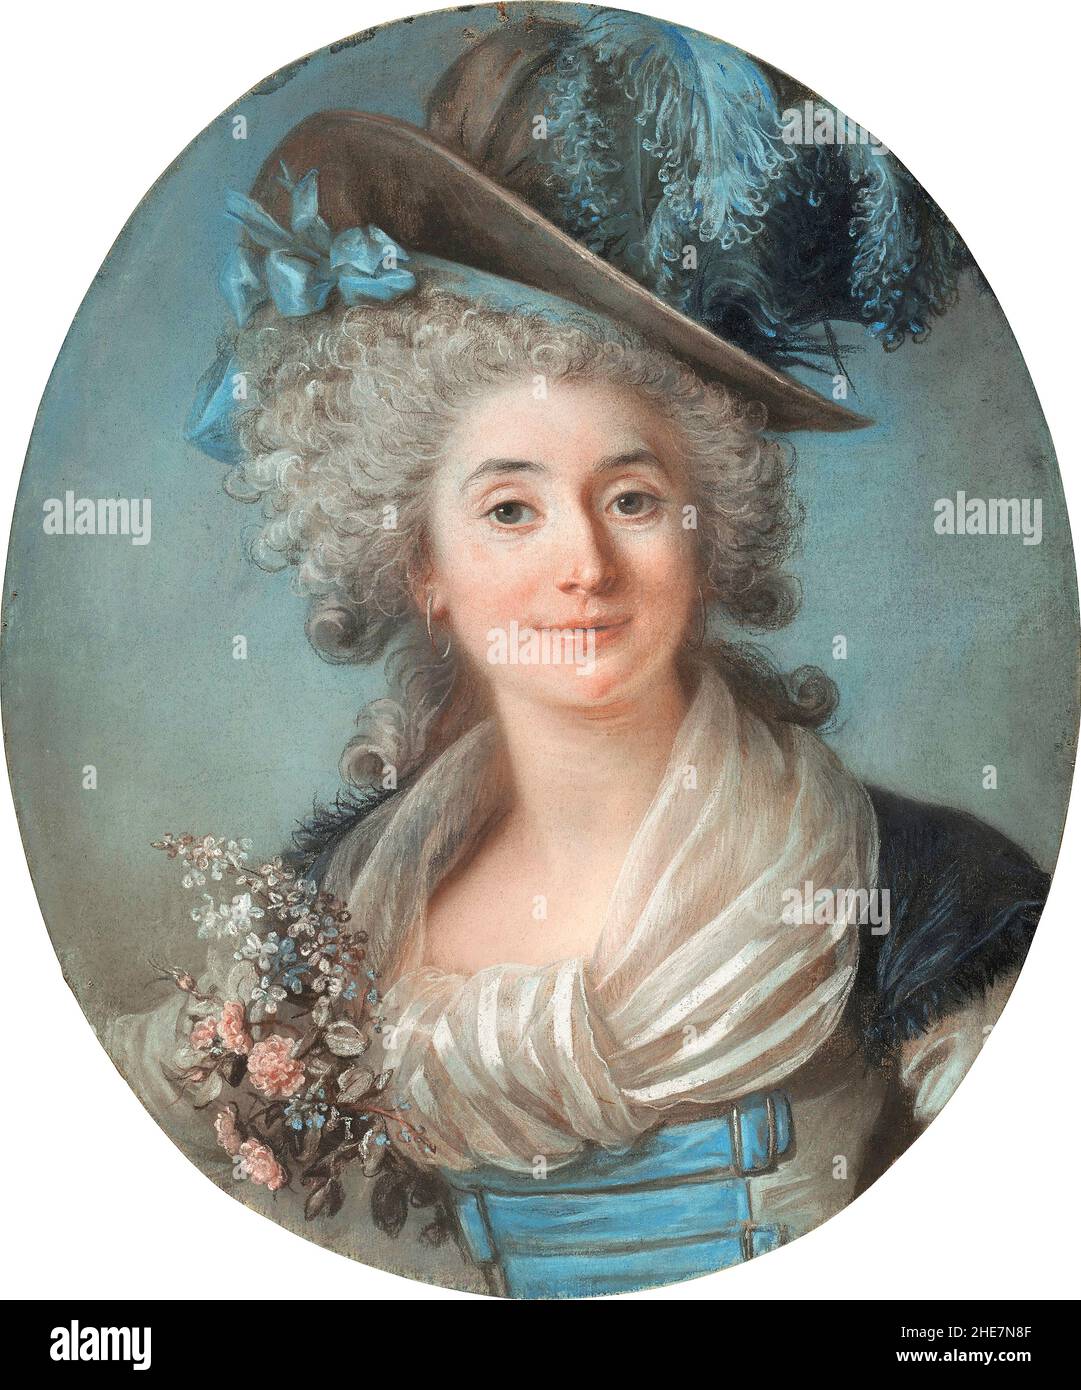 A Fashionable Noblewoman Wearing a Plumed Hat by the French artist, Adélaïde Labille-Guiard (1749-1803),  pastel on blue laid paper, c. 1789 Stock Photo